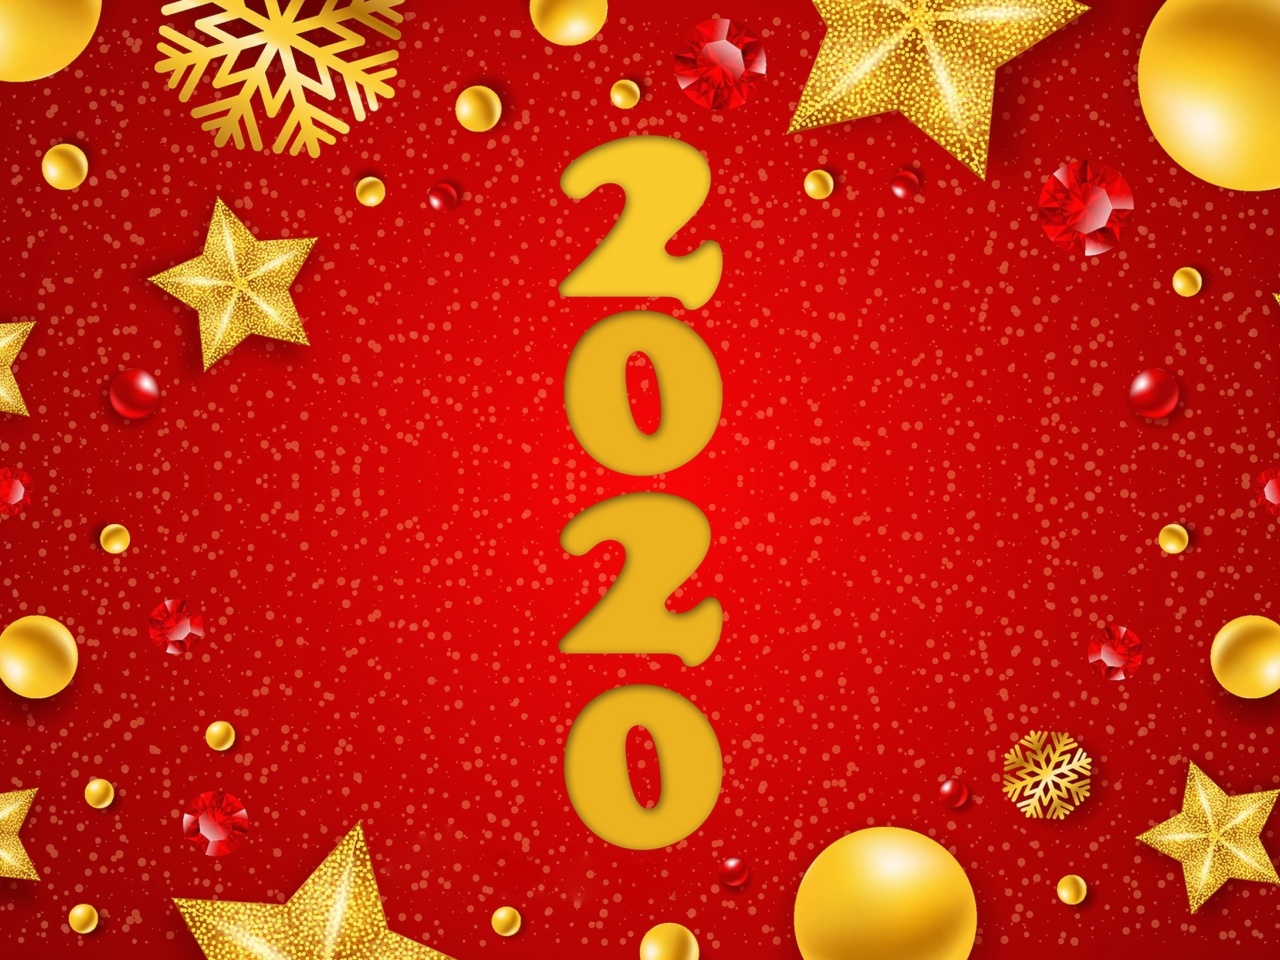 Das Happy New Year 2020 Messages Wallpaper 1280x960